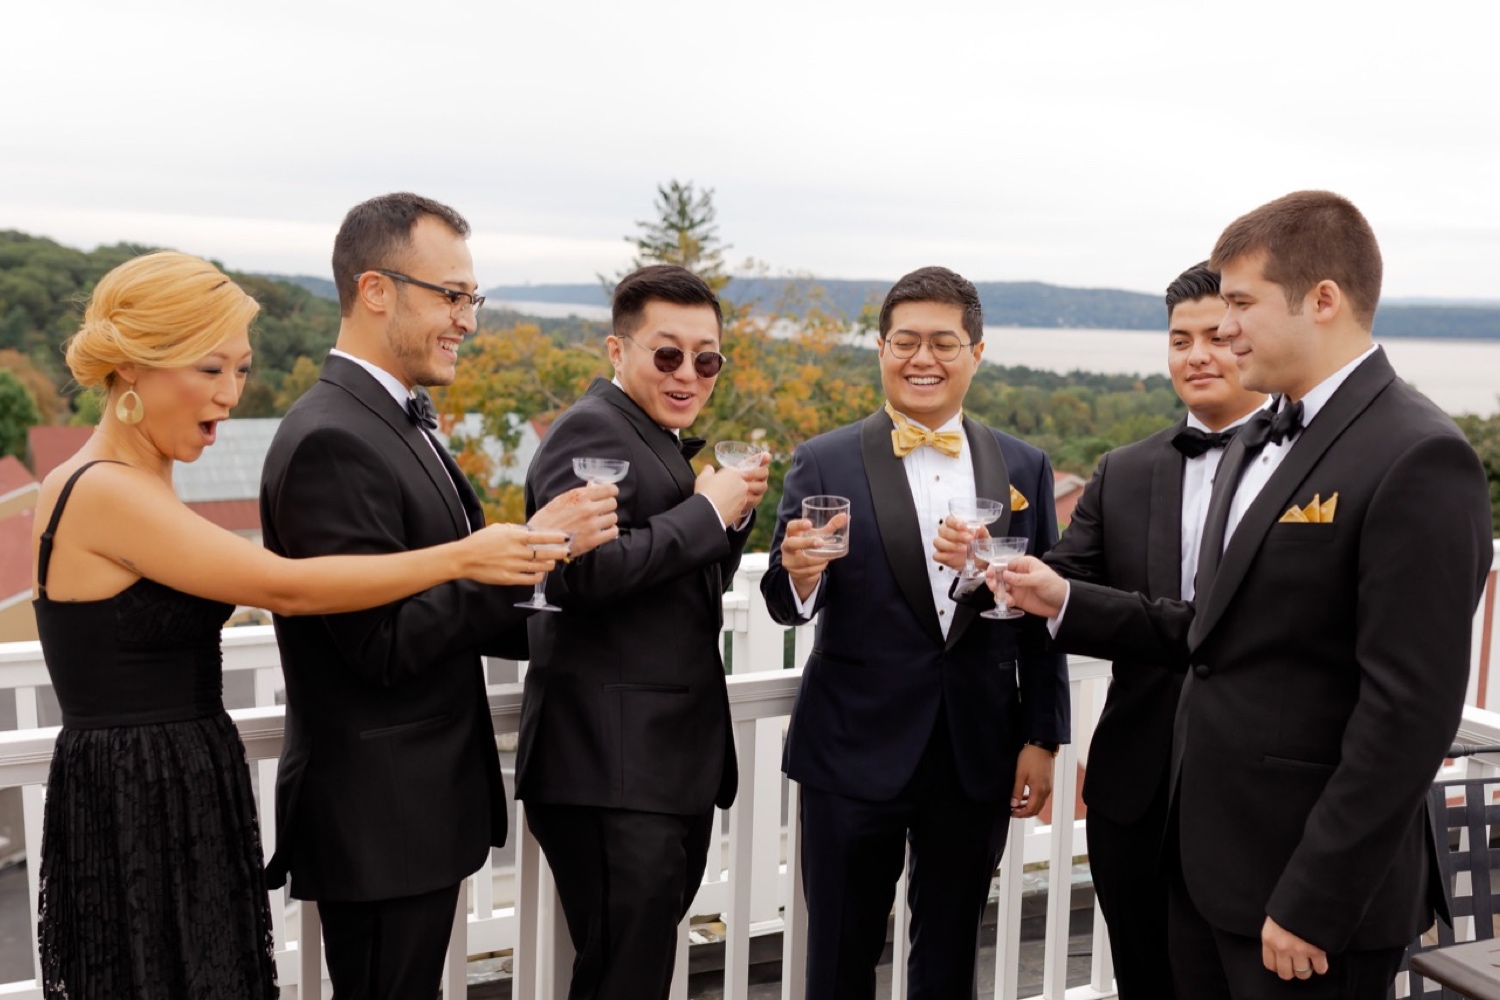 A groom and his wedding party celebrating his wedding day at the Tappan Hill Mansion.